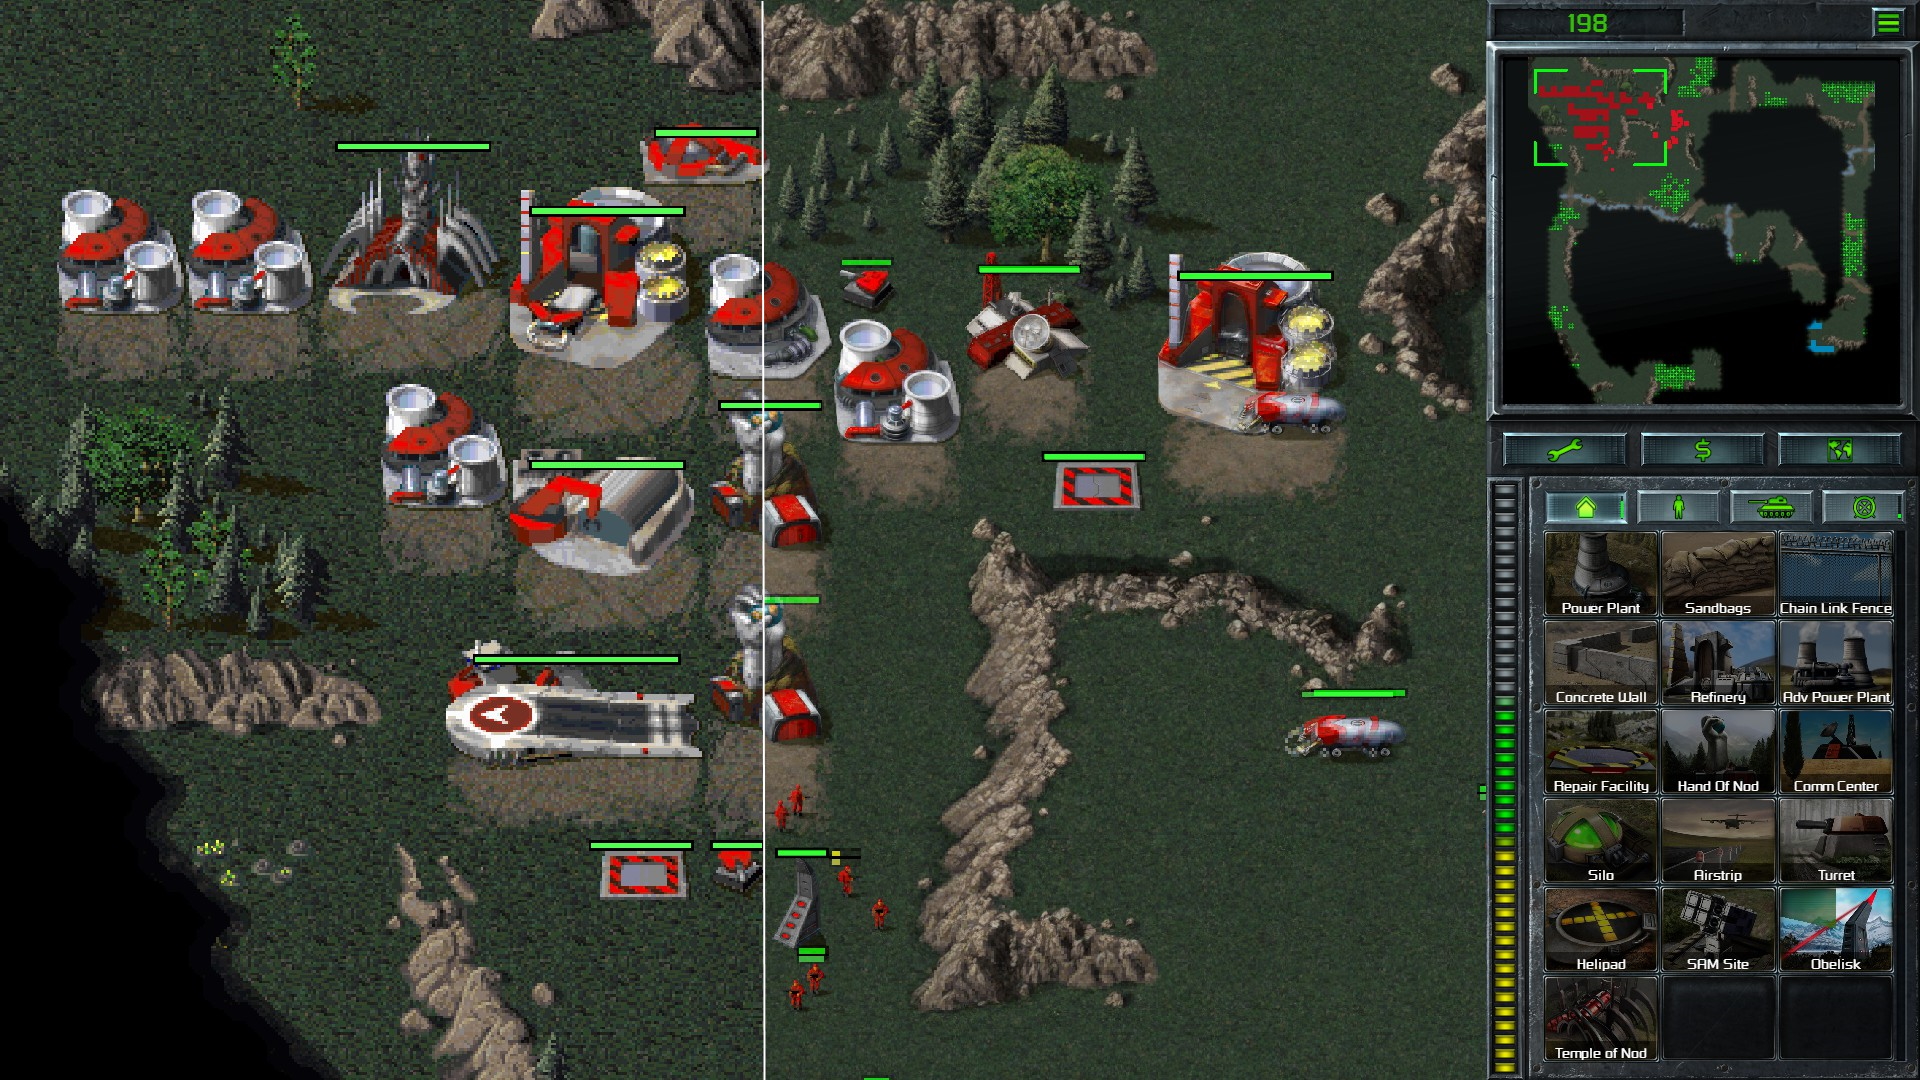 Command and conquer remastered. Command & Conquer Remastered collection. Command Conquer Red Alert 1 Remastered. Command Conquer Remastered collection 2020. Command Conquer Westwood.